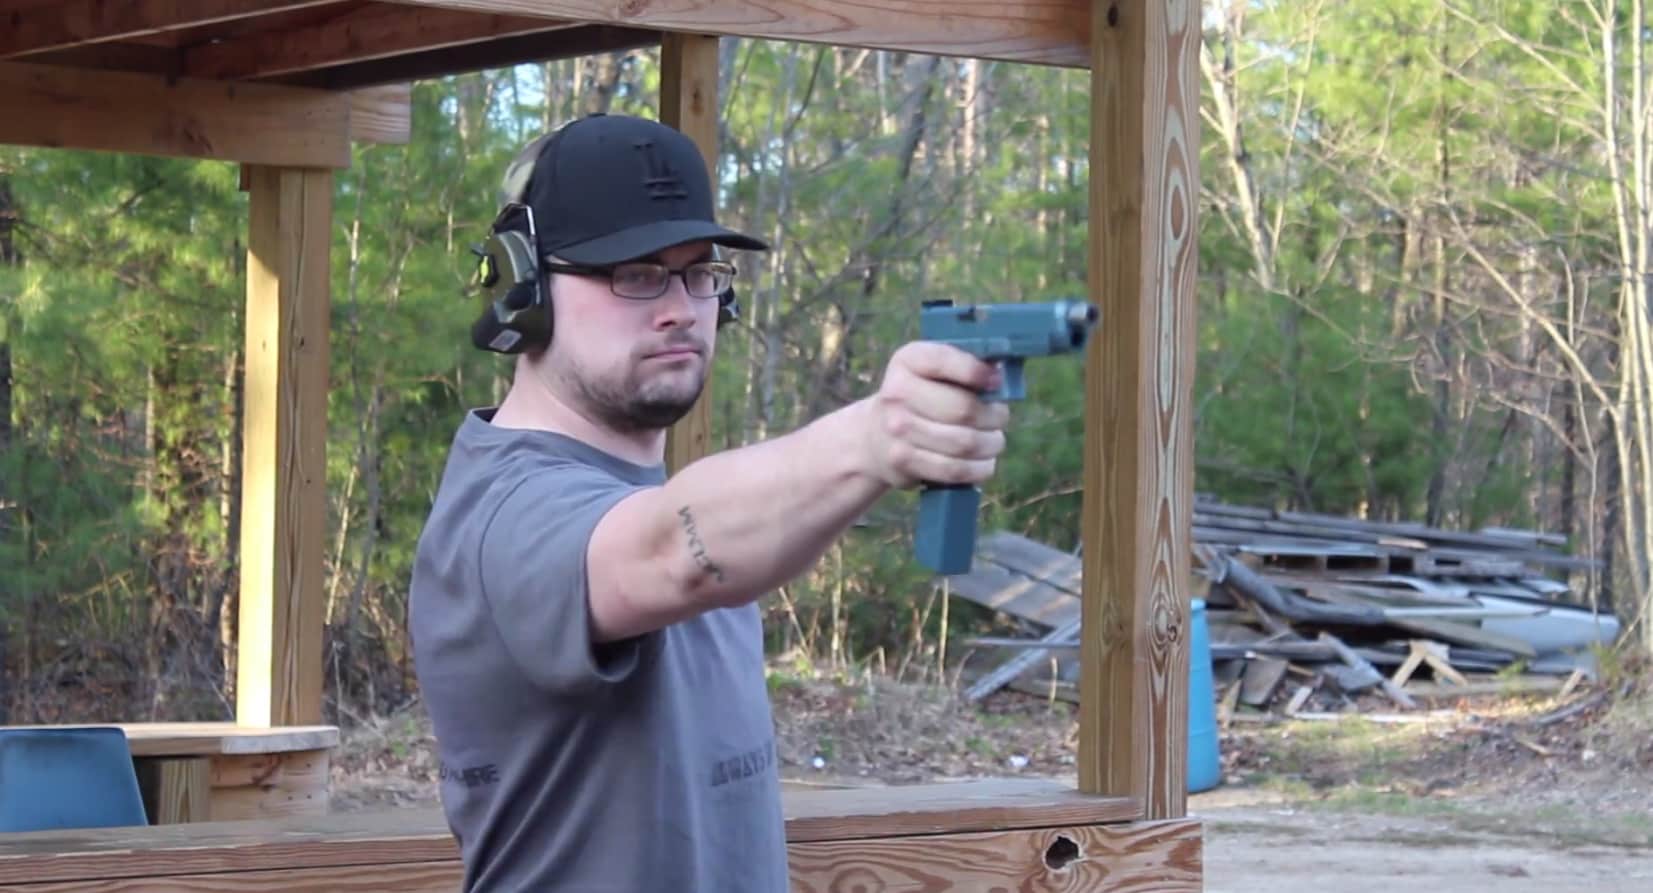 Video: If RoboCop Used a Glock, It’d Be This One